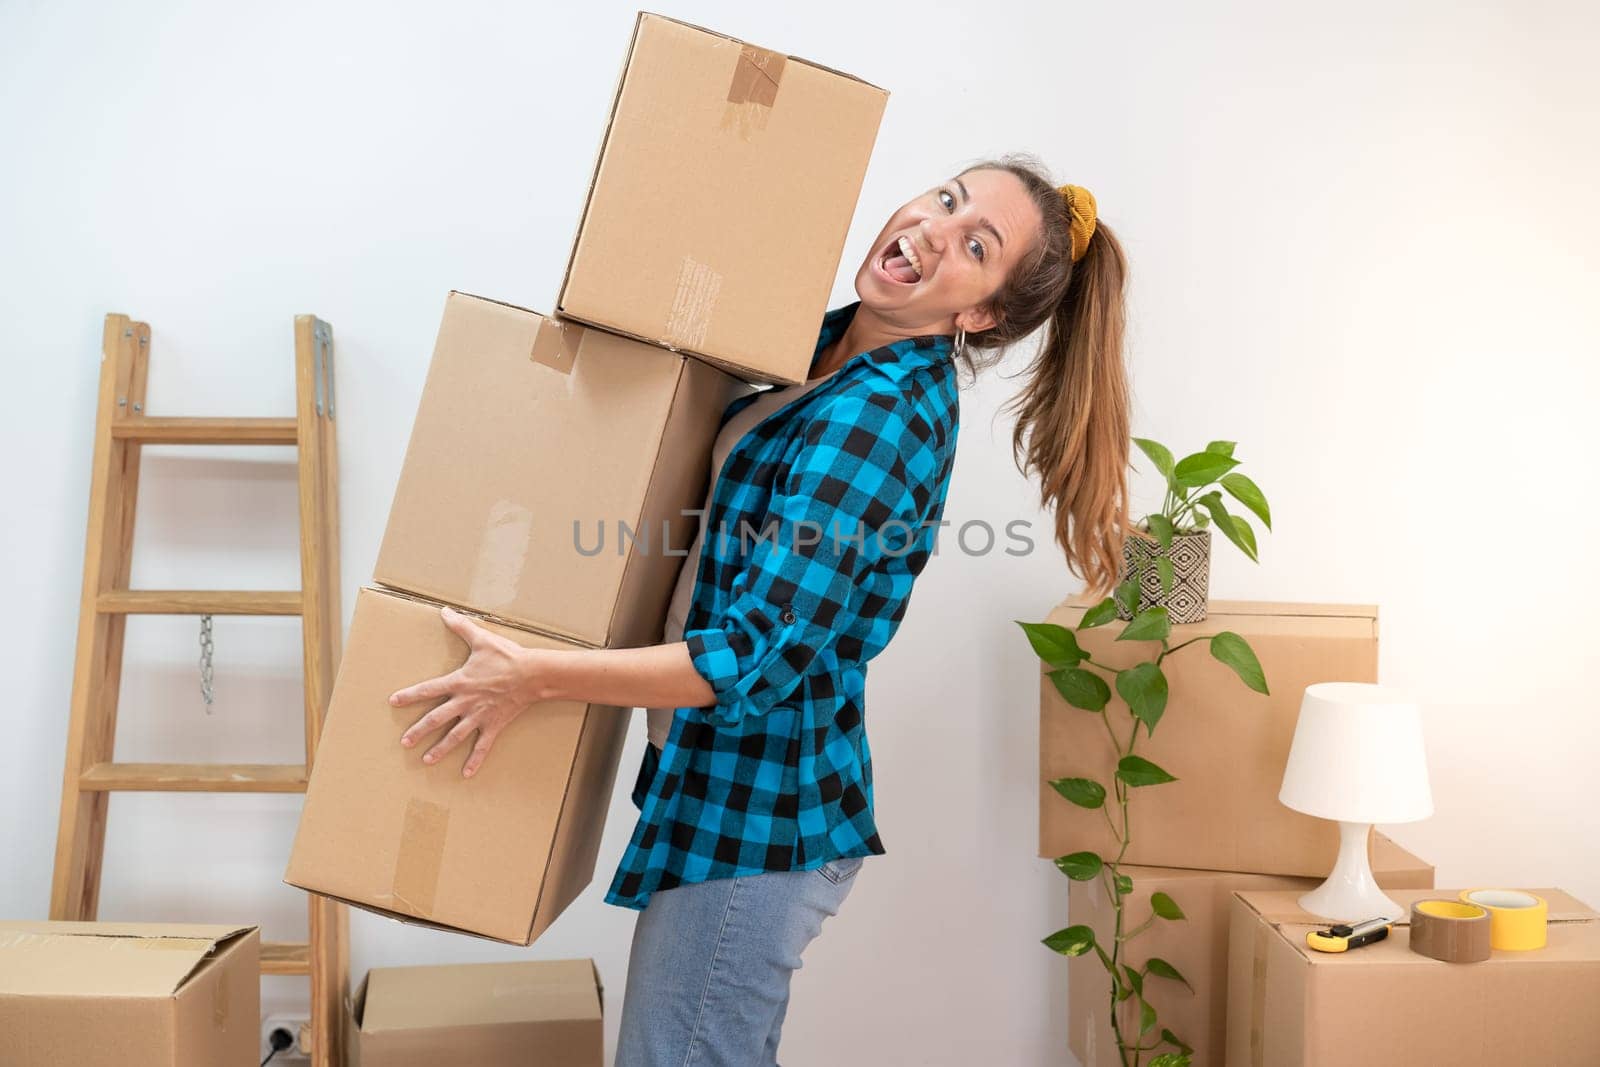 Young woman with big smile carrying heavy cardboard boxes in house. Moving to new home concept. High quality photo